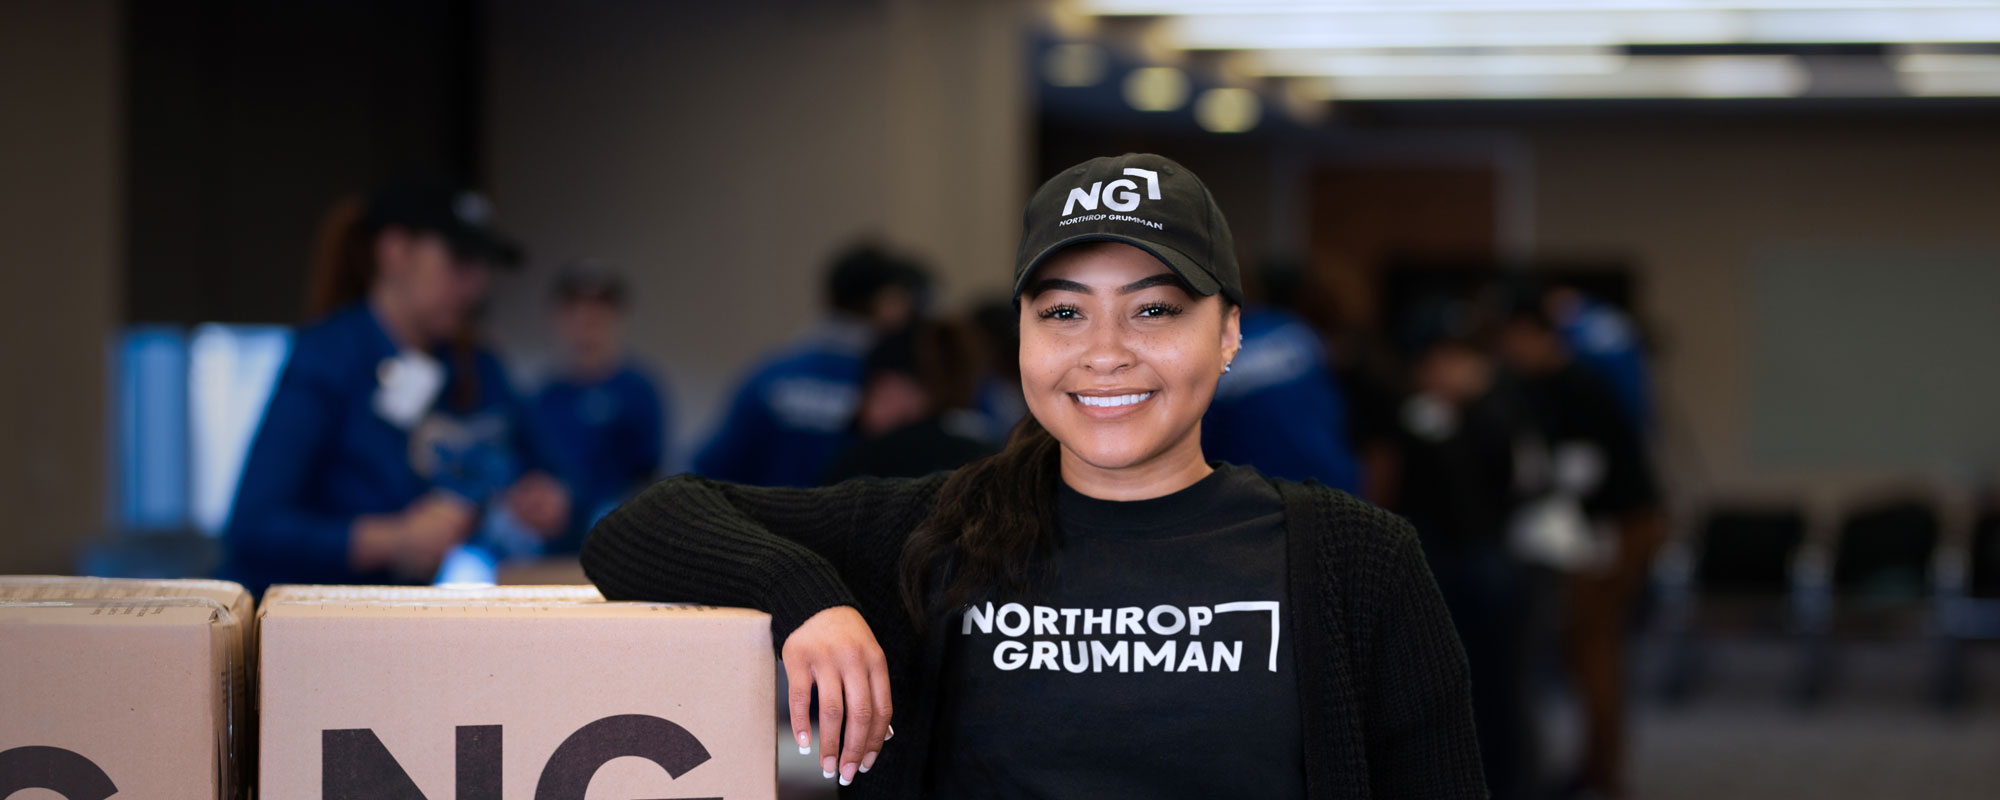 Woman smiling in Northrop Grumman shirt and cap with  items for donation. 